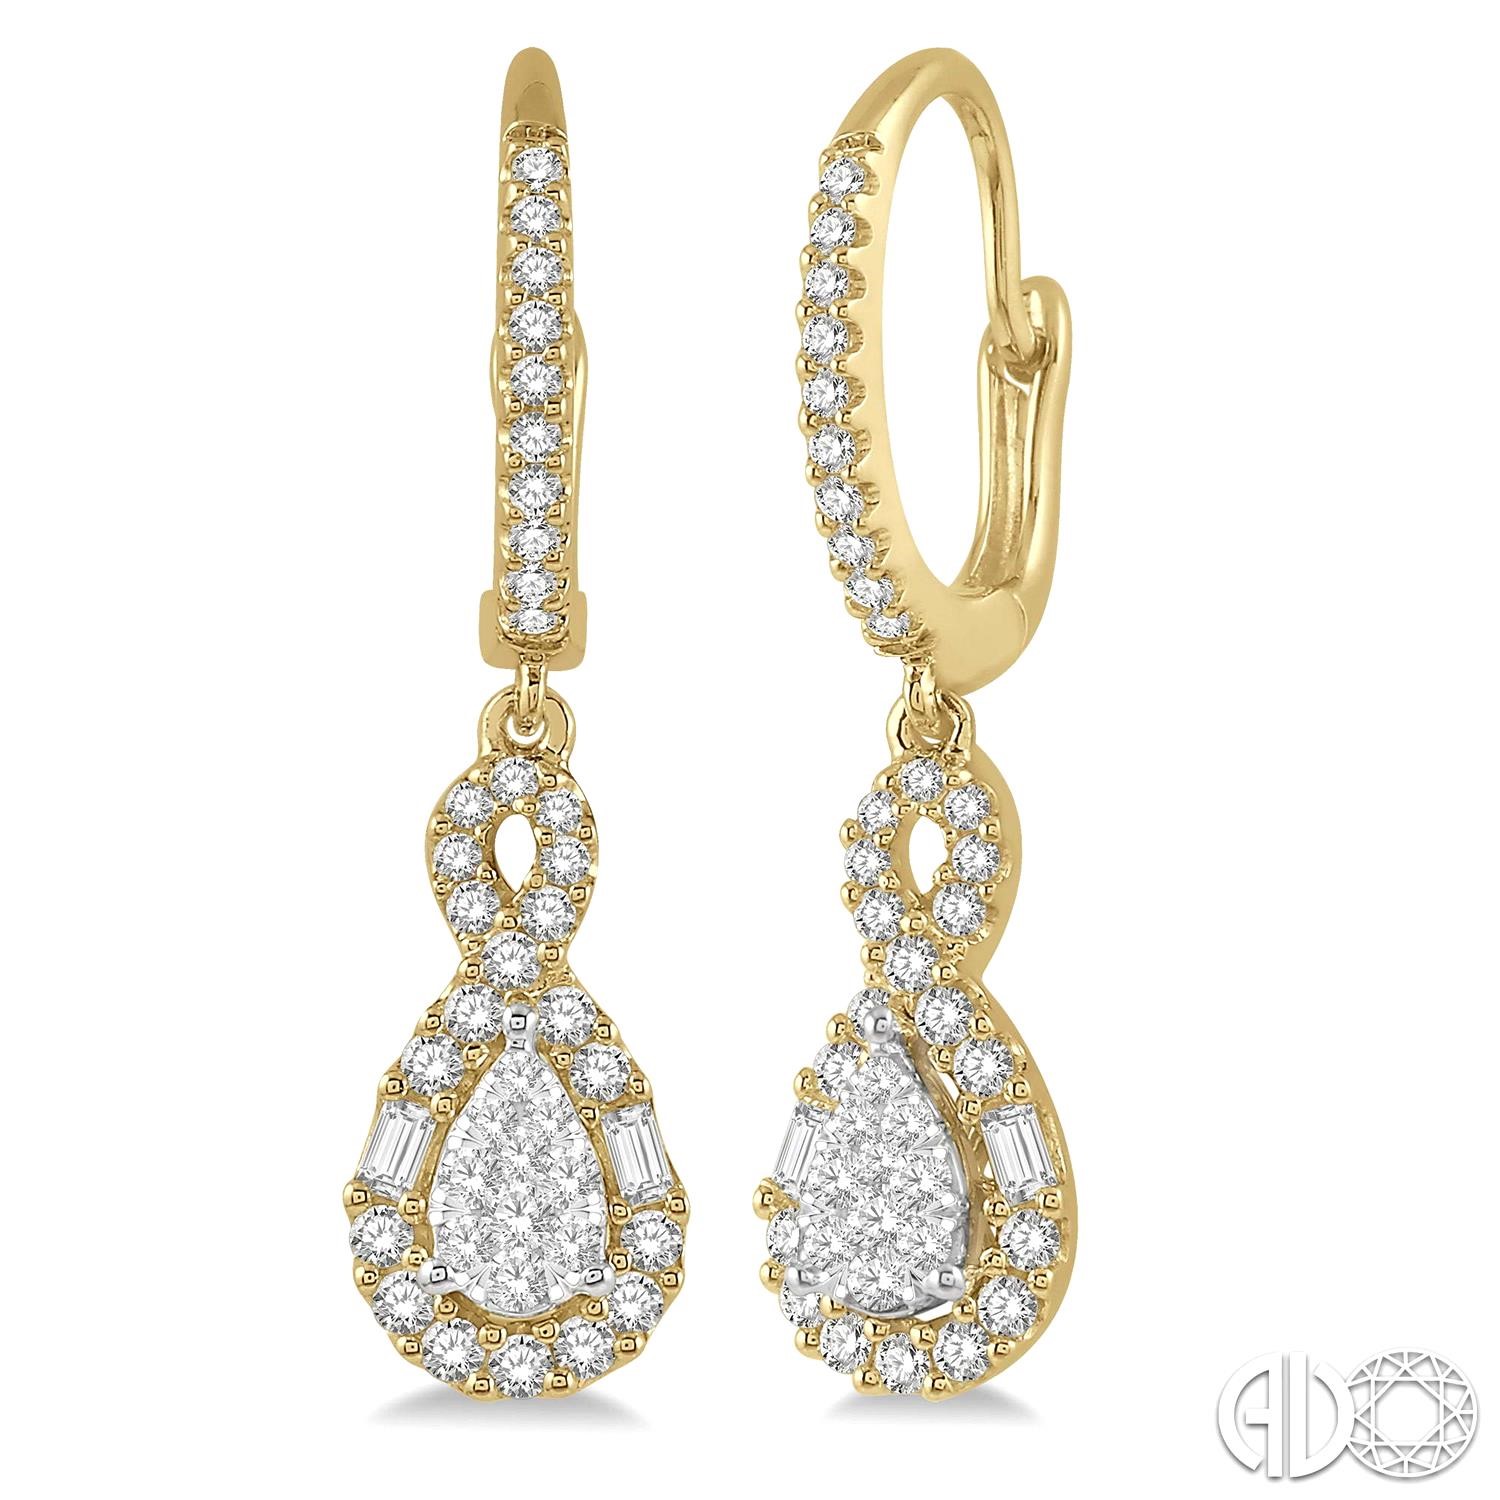 14 Karat Yellow/White Gold Lovebright Earrings With 82 Round/Baguette .67Ctw  Hi Si3-I1 Diamonds